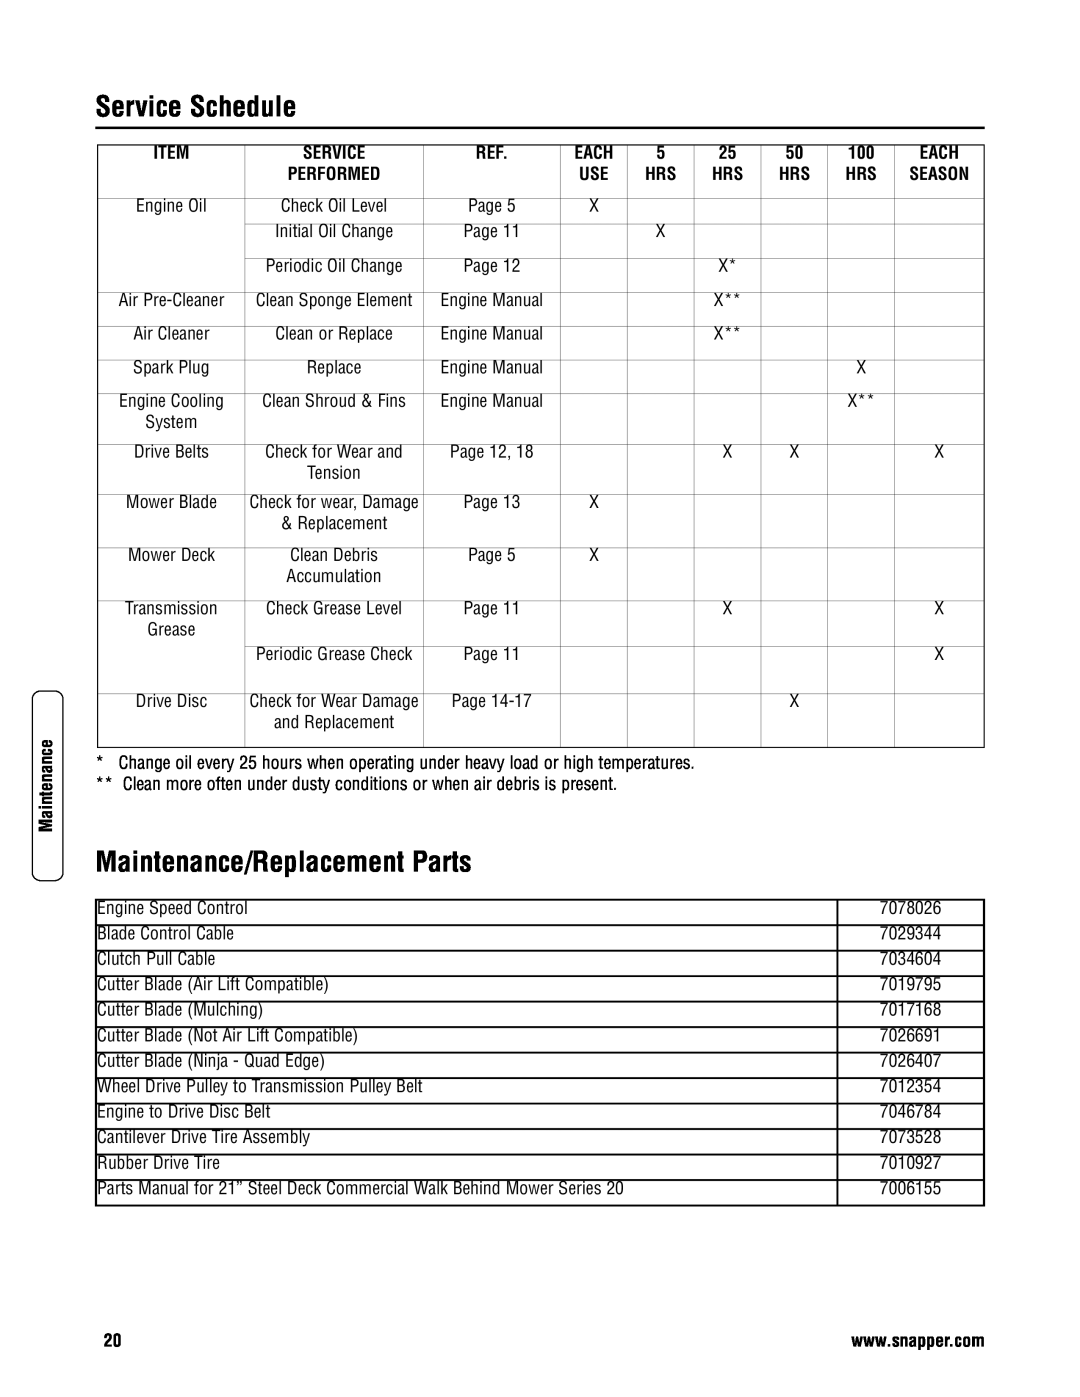 Snapper CP215520HV specifications Service Schedule, Maintenance/Replacement Parts 